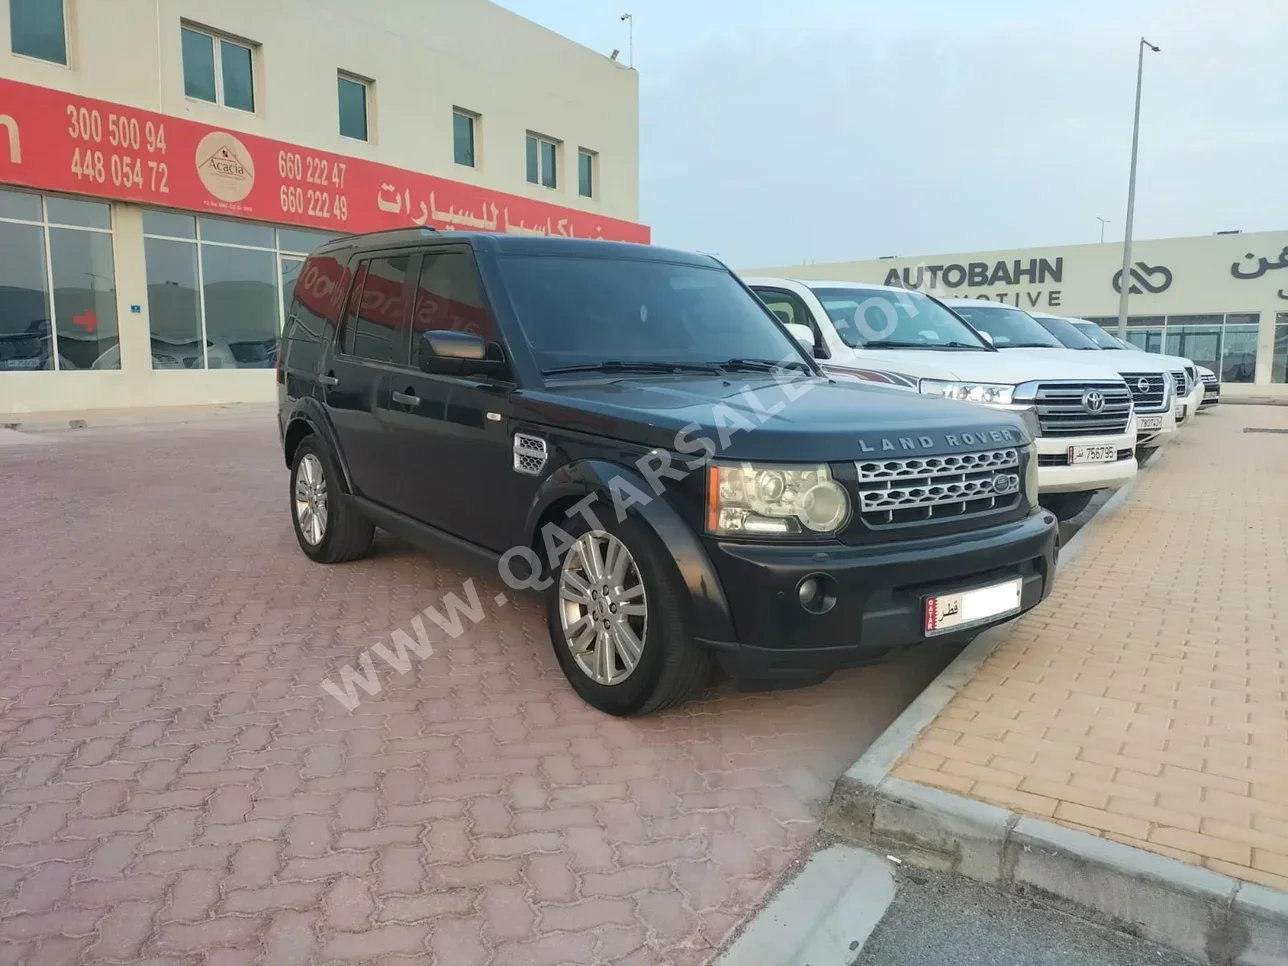 Land Rover  Discovery  Sport  2011  Automatic  220,000 Km  8 Cylinder  All Wheel Drive (AWD)  SUV  Black